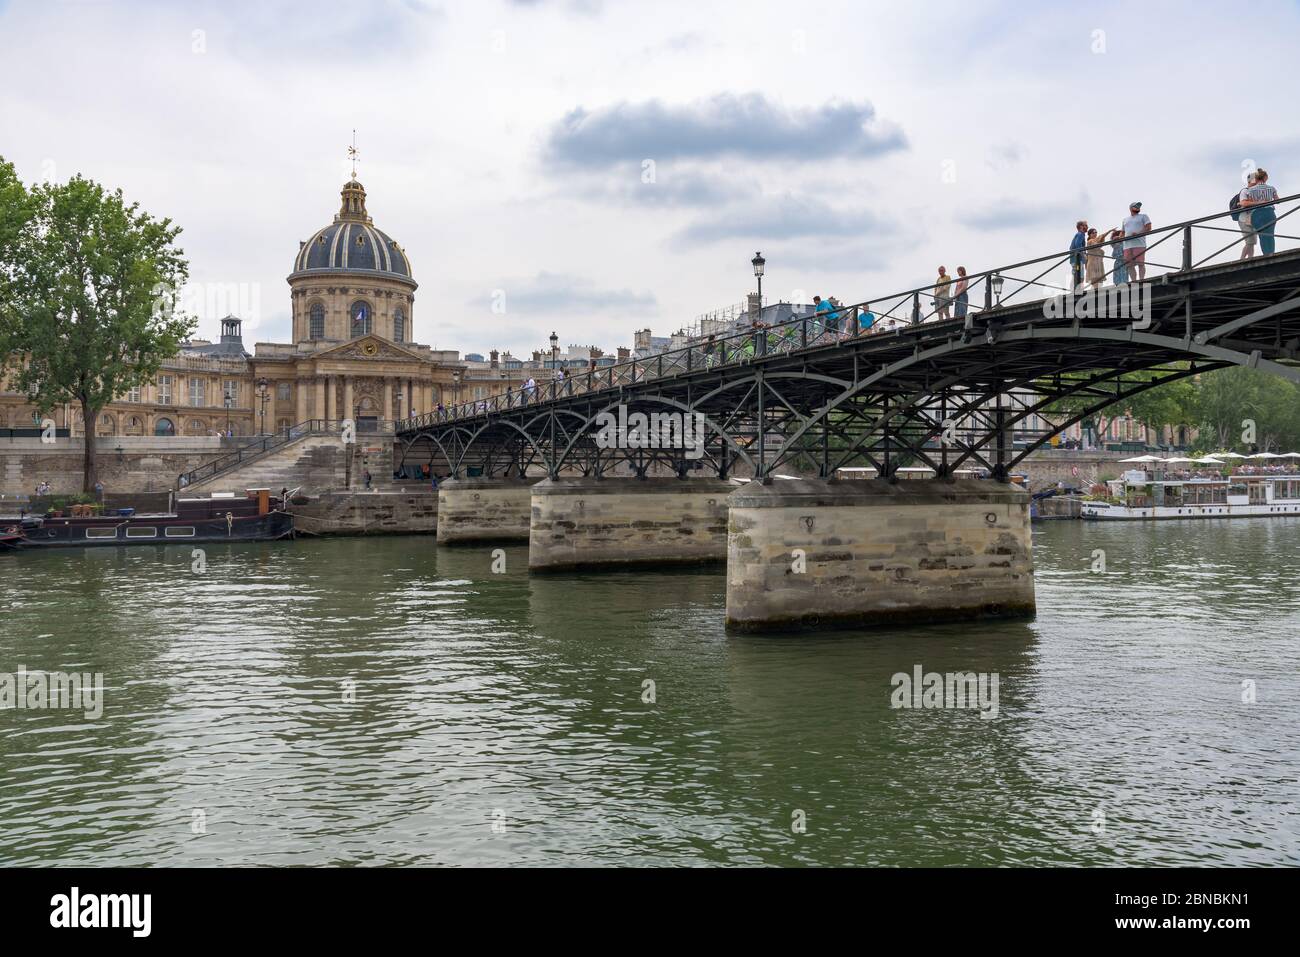 Paris, France. View of the Pont des Arts bridge and the Institut de France, grand cupola-topped building in baroque style. Stock Photo